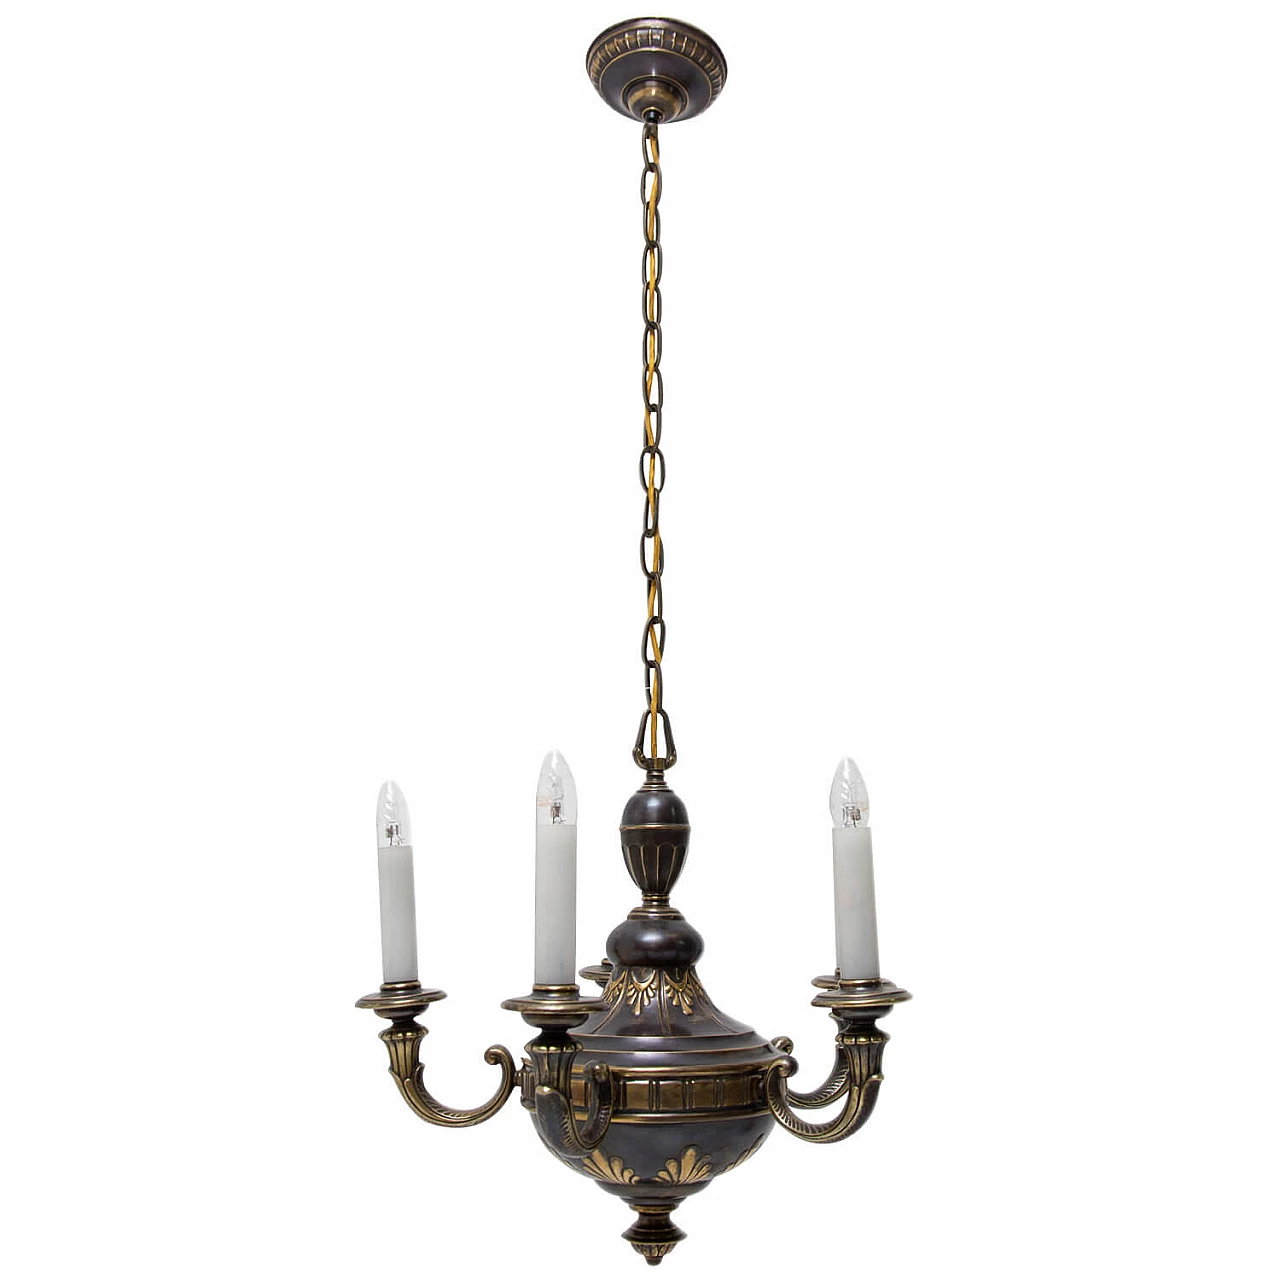 Brass chandelier with 5 lights, early 20th century 1277264